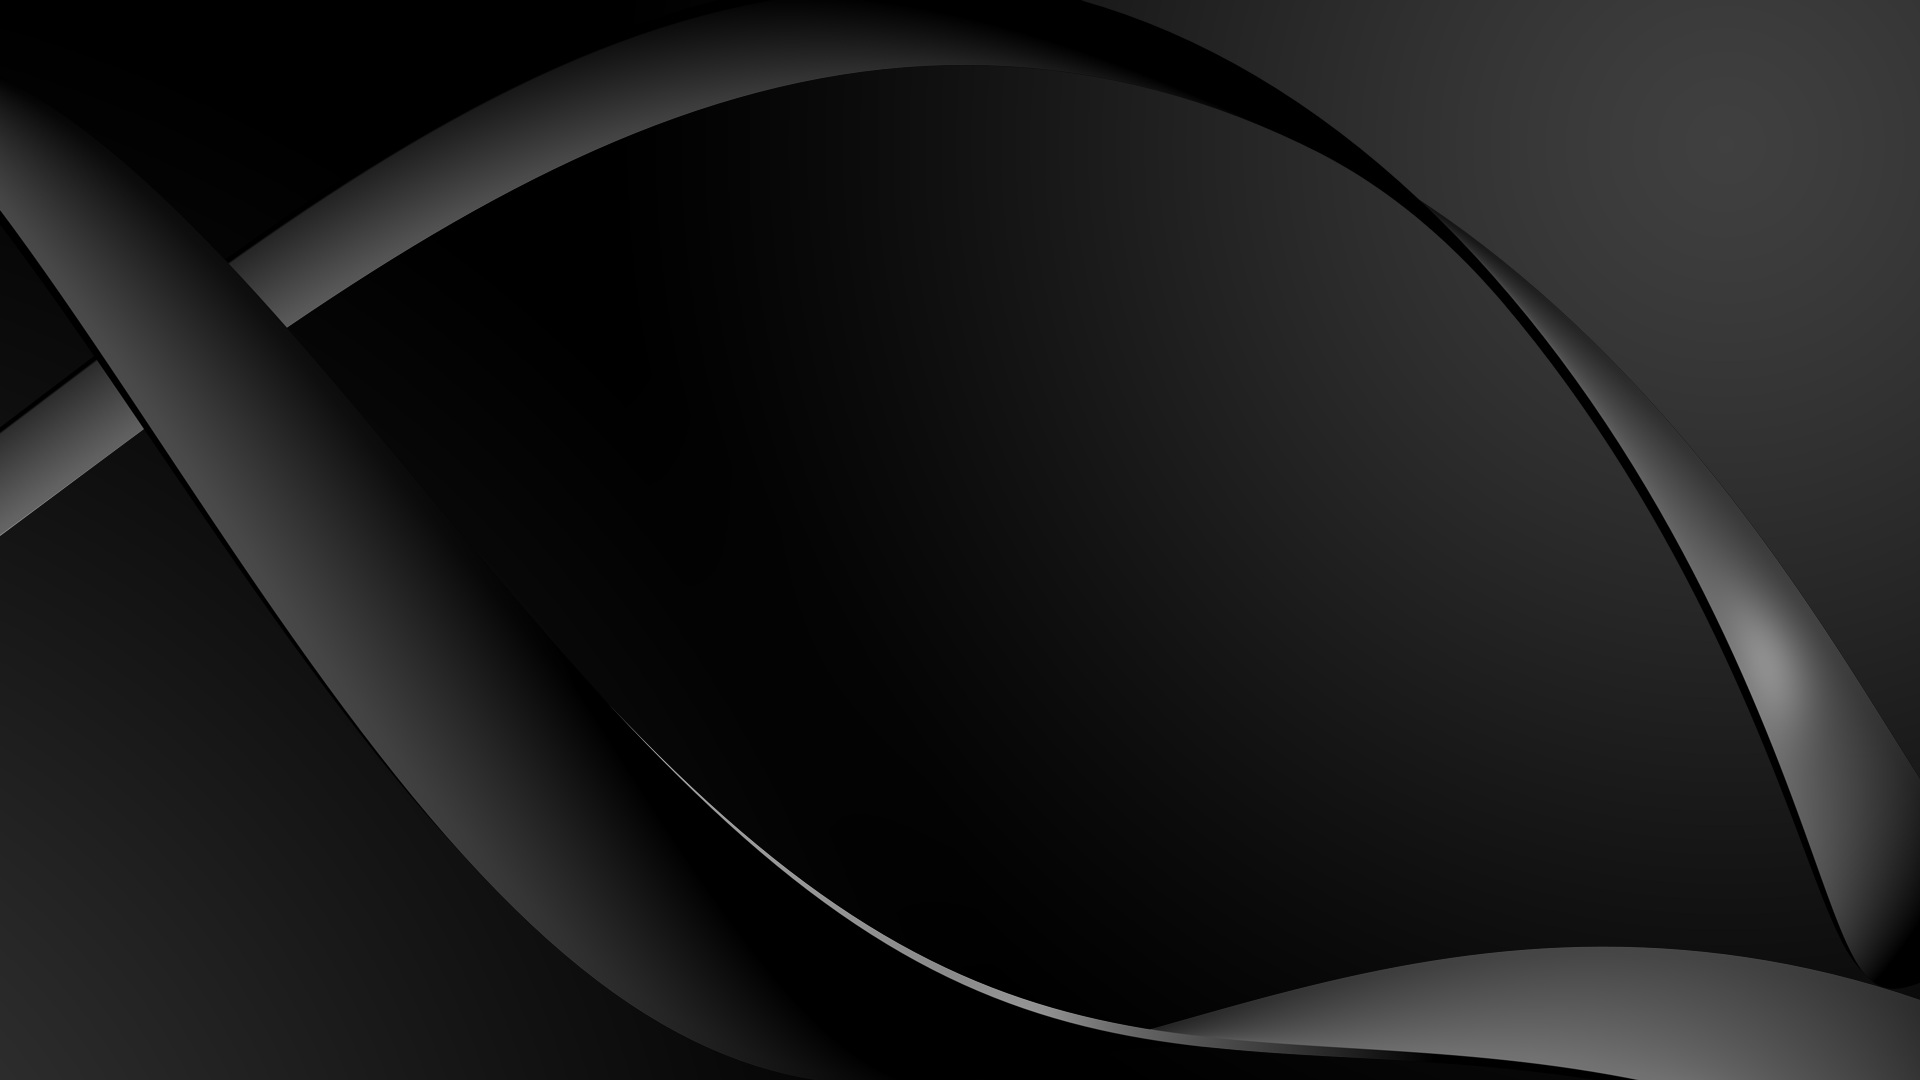 Black Abstract Wallpaper 2835 Hd Wallpapers in Abstract   Imagescicom 1920x1080